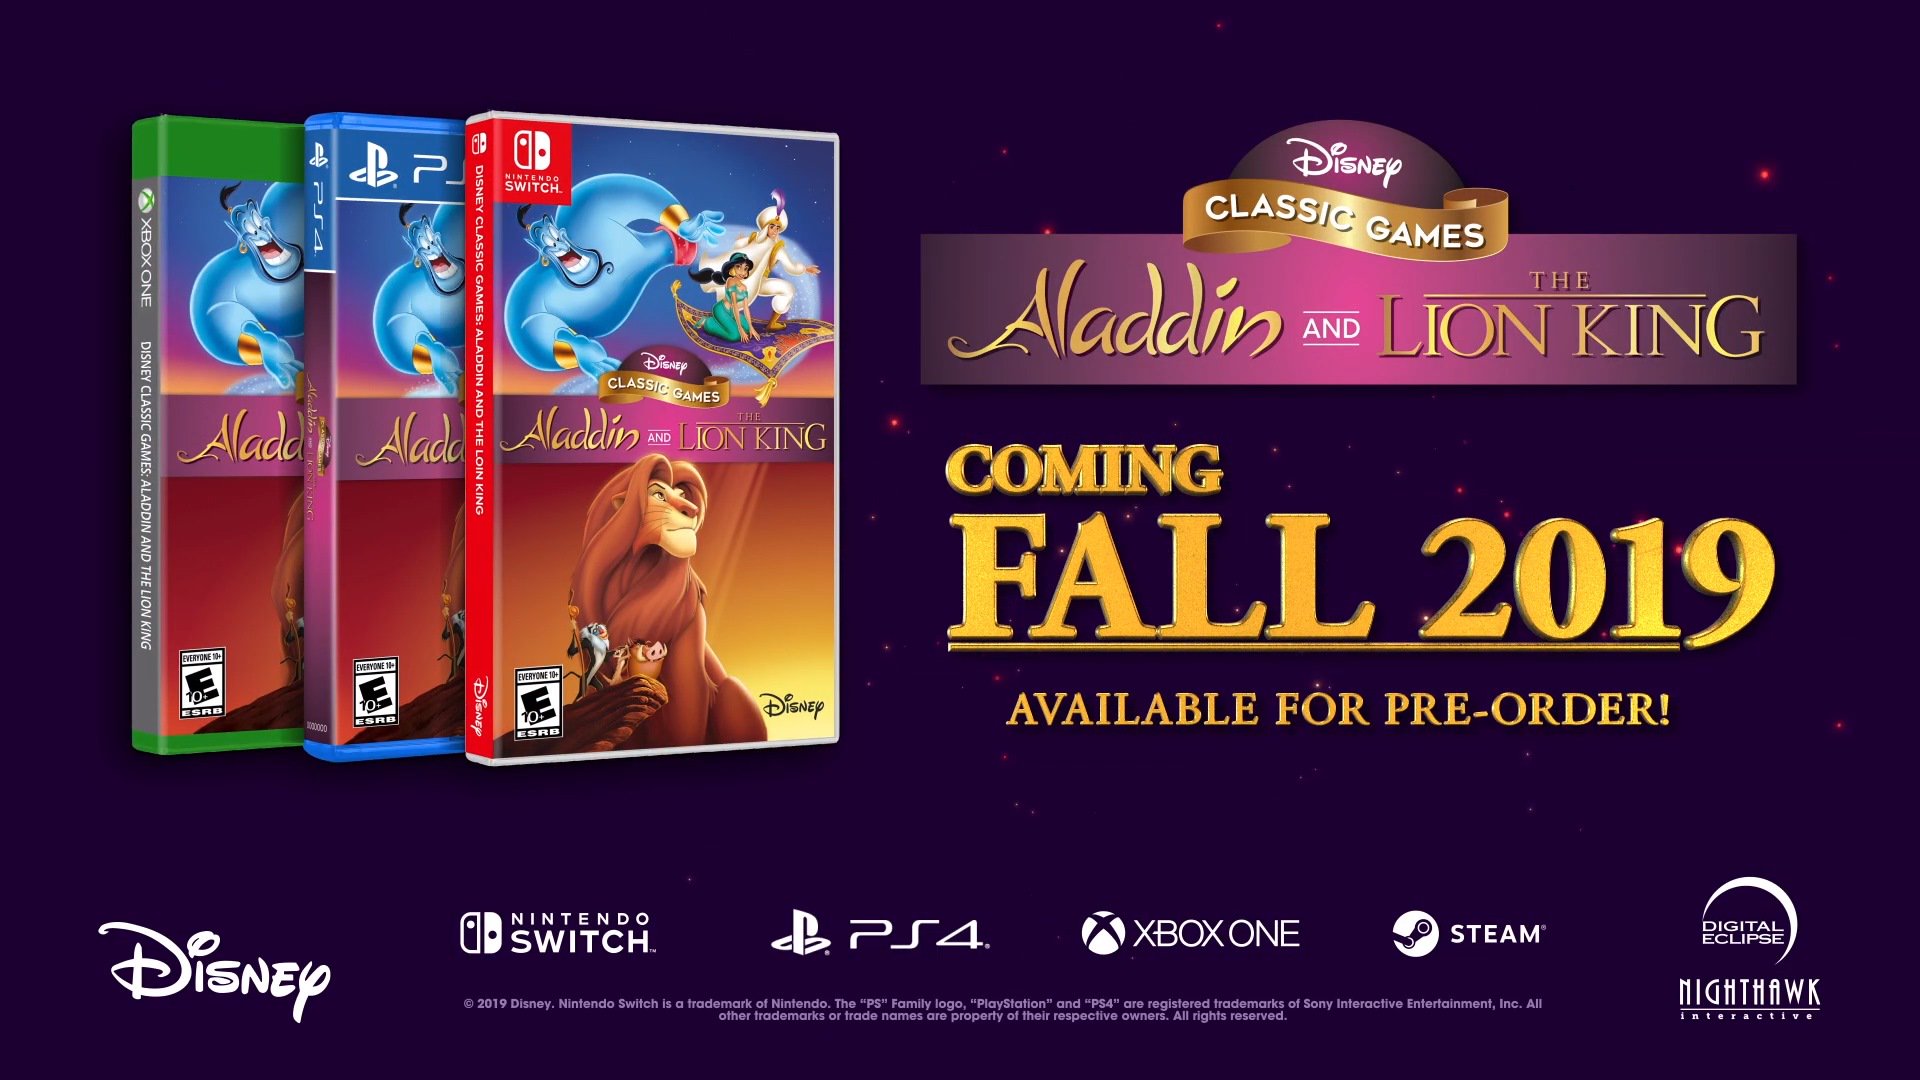 Disney Classic Games: Aladdin and The Lion King Announced for PC and Consoles